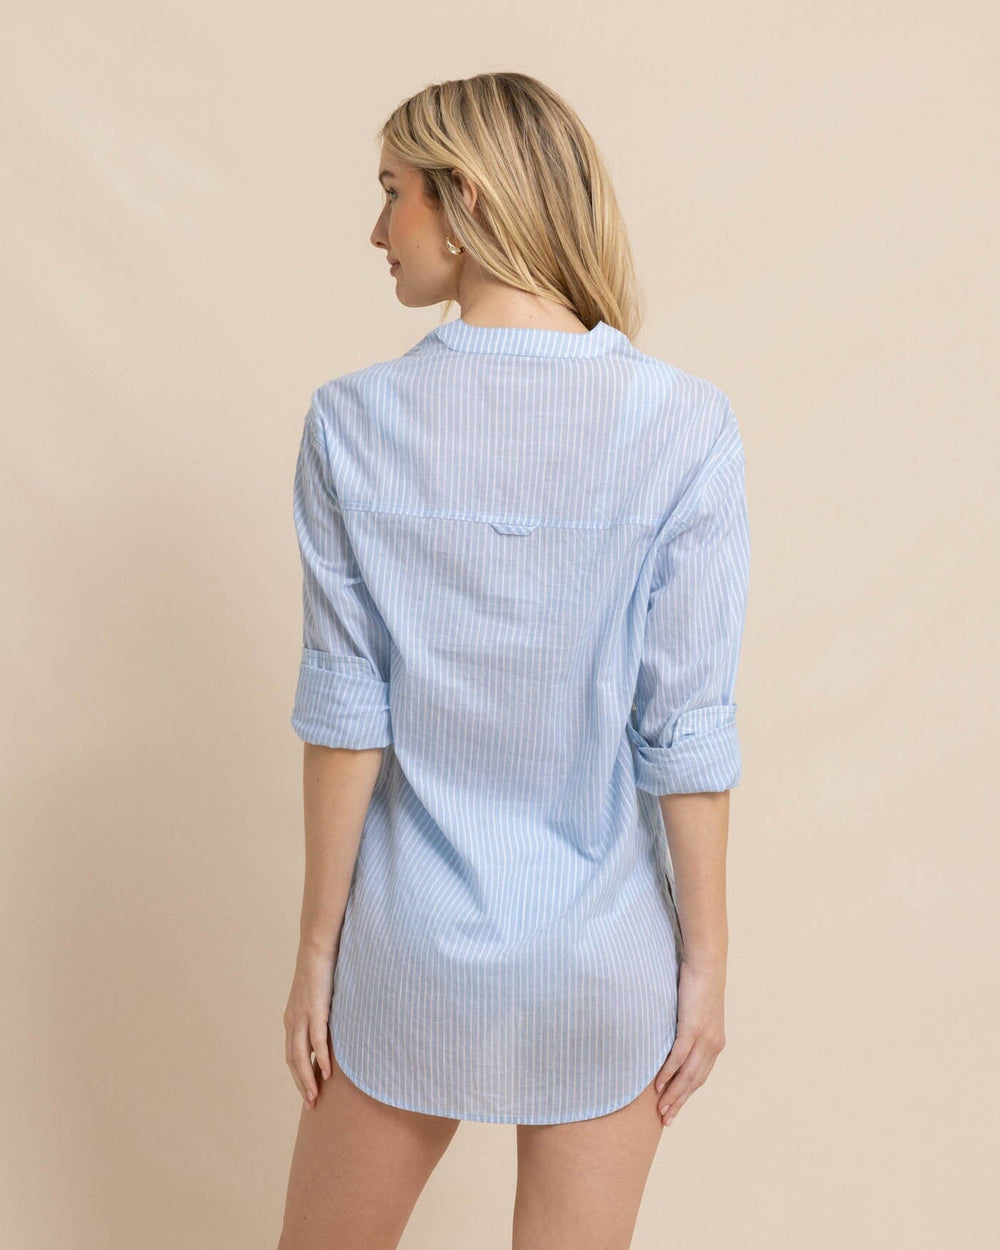 The back view of the Southern Tide Wrenley Airy Cotton Tunic by Southern Tide - Clearwater Blue